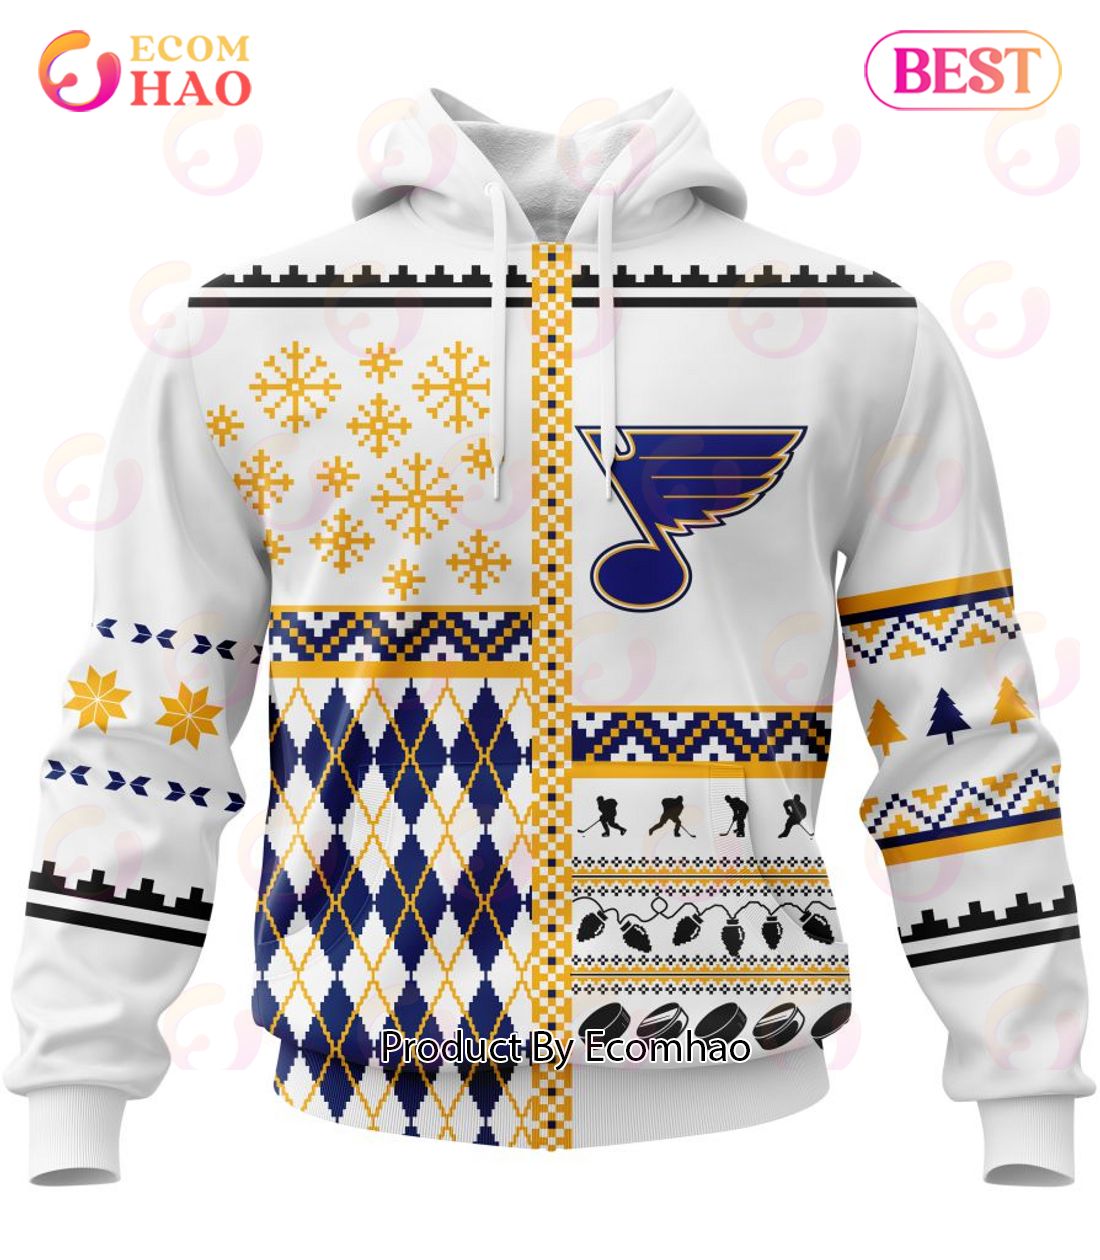 St. Louis Blues NHL Special Design Jersey With Your Ribs For Halloween  Hoodie T Shirt - Growkoc